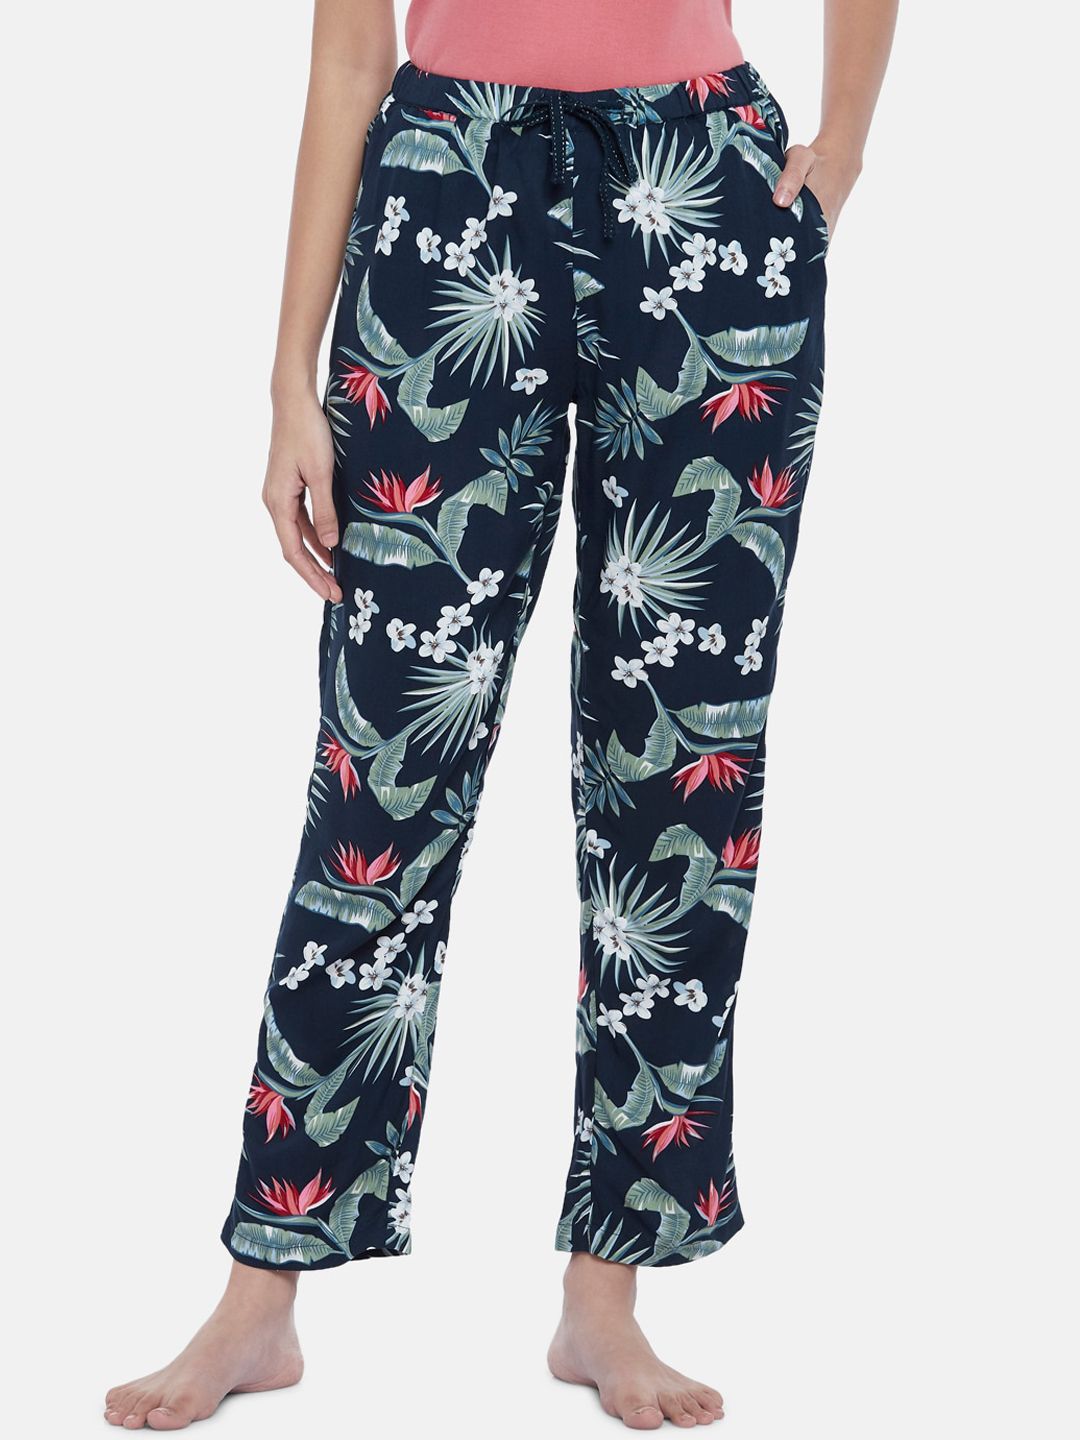 Dreamz by Pantaloons Navy Blue & Green Floral Printed Lounge Pants Price in India